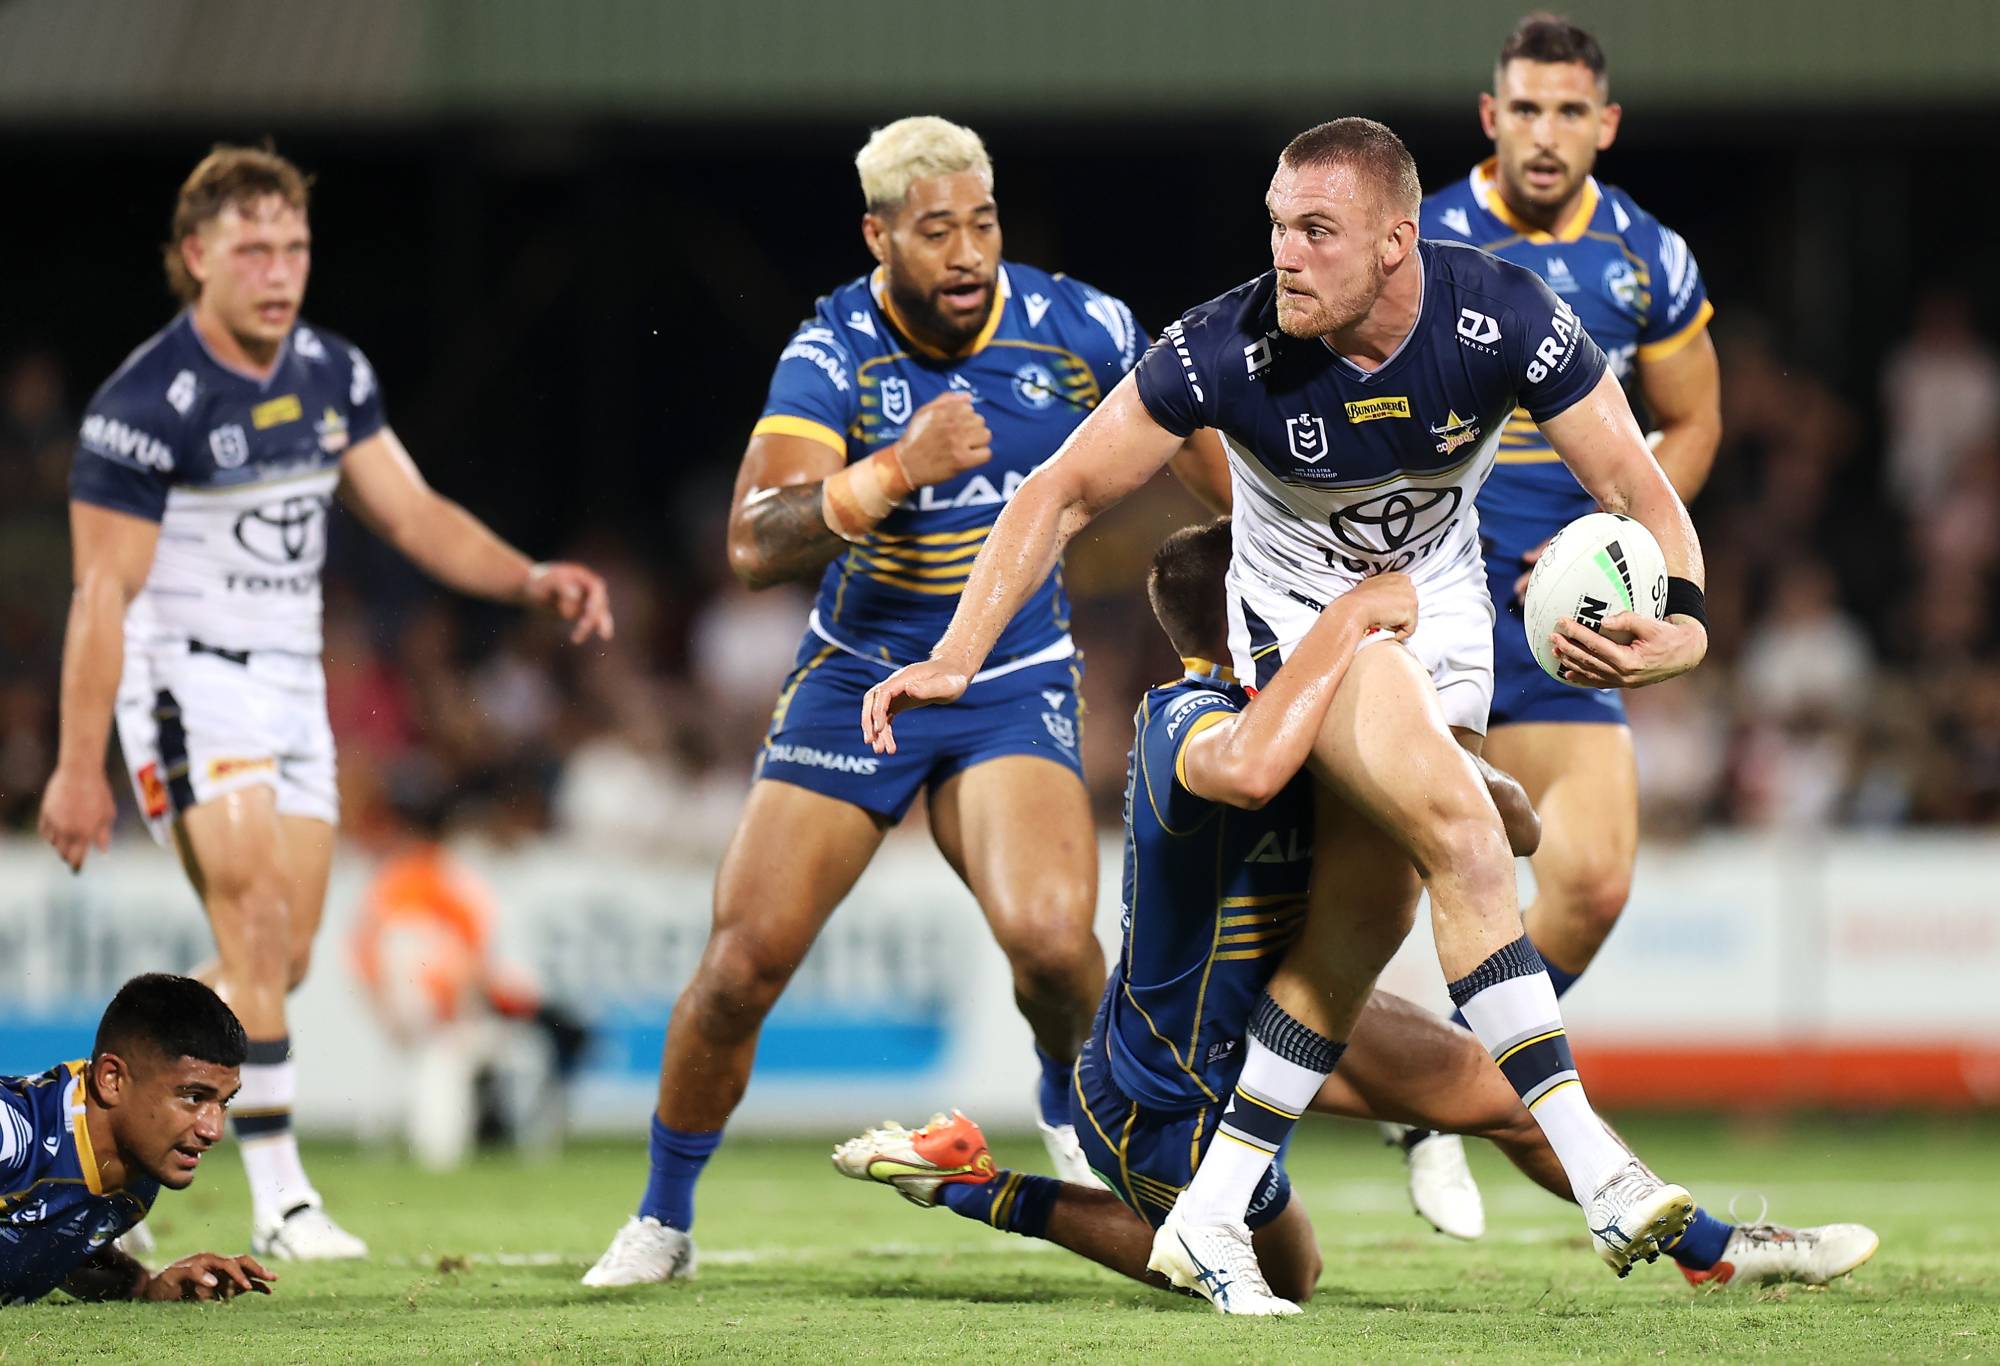 DARWIN, AUSTRALIA - APRIL 30: Cowboys' Quinn Hess appears to be heading for a pass during the eighth round encounter of an NFL game between the Parramatta Isles and the North Queensland Cowboys at Teo Stadium, on April 30, 2022, in Darwin, Australia.  (Photo by Mark Colby/Getty Images)